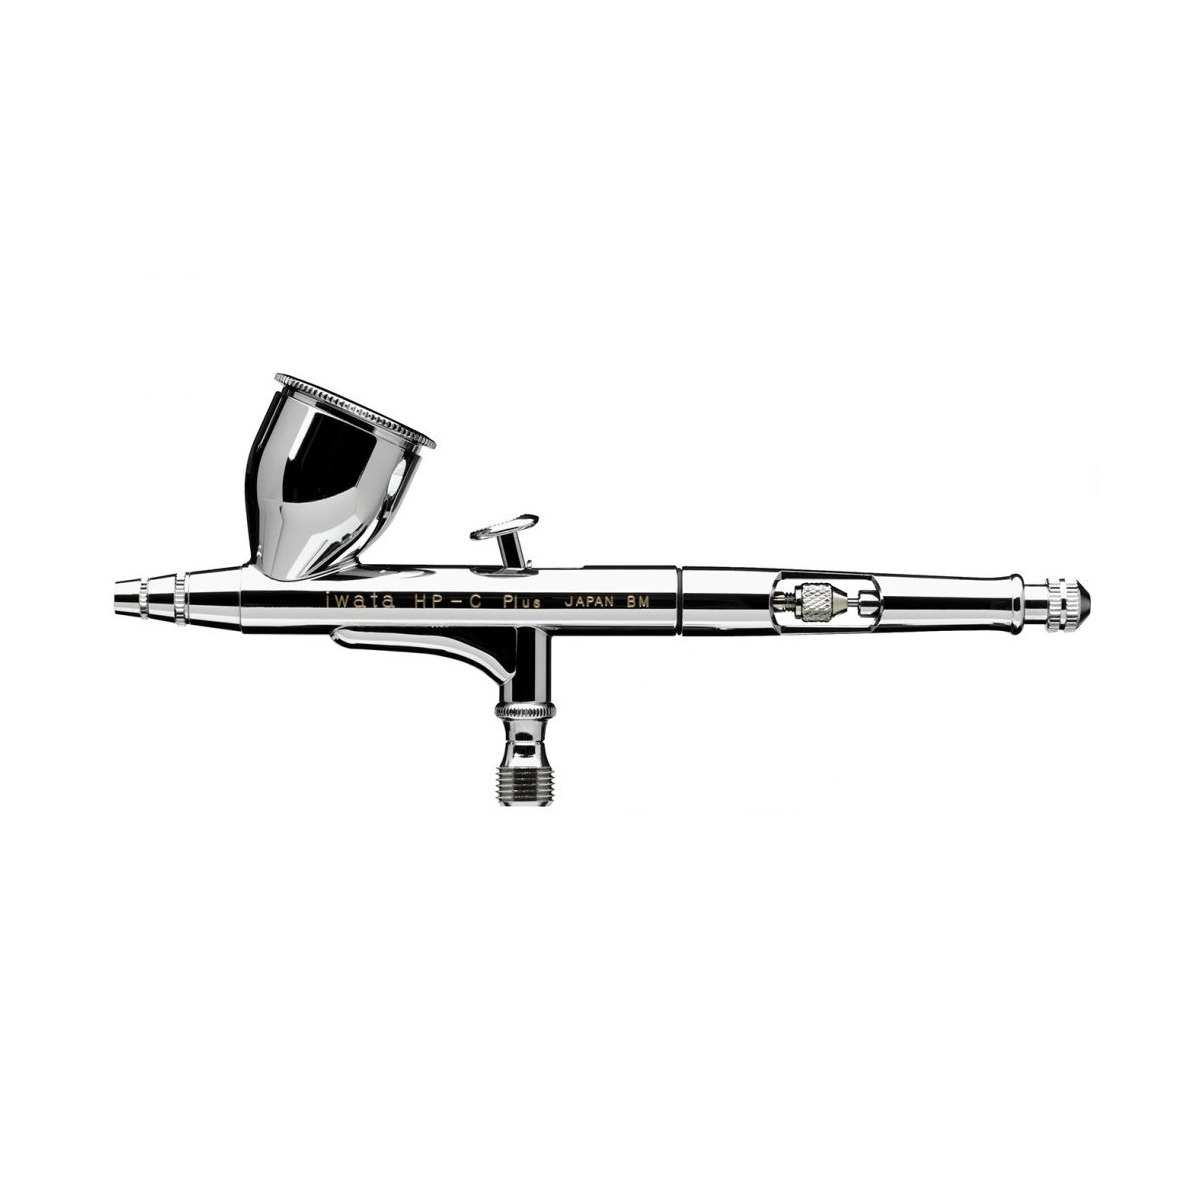 Iwata High Performance HP C Plus Airbrush (Double Action)